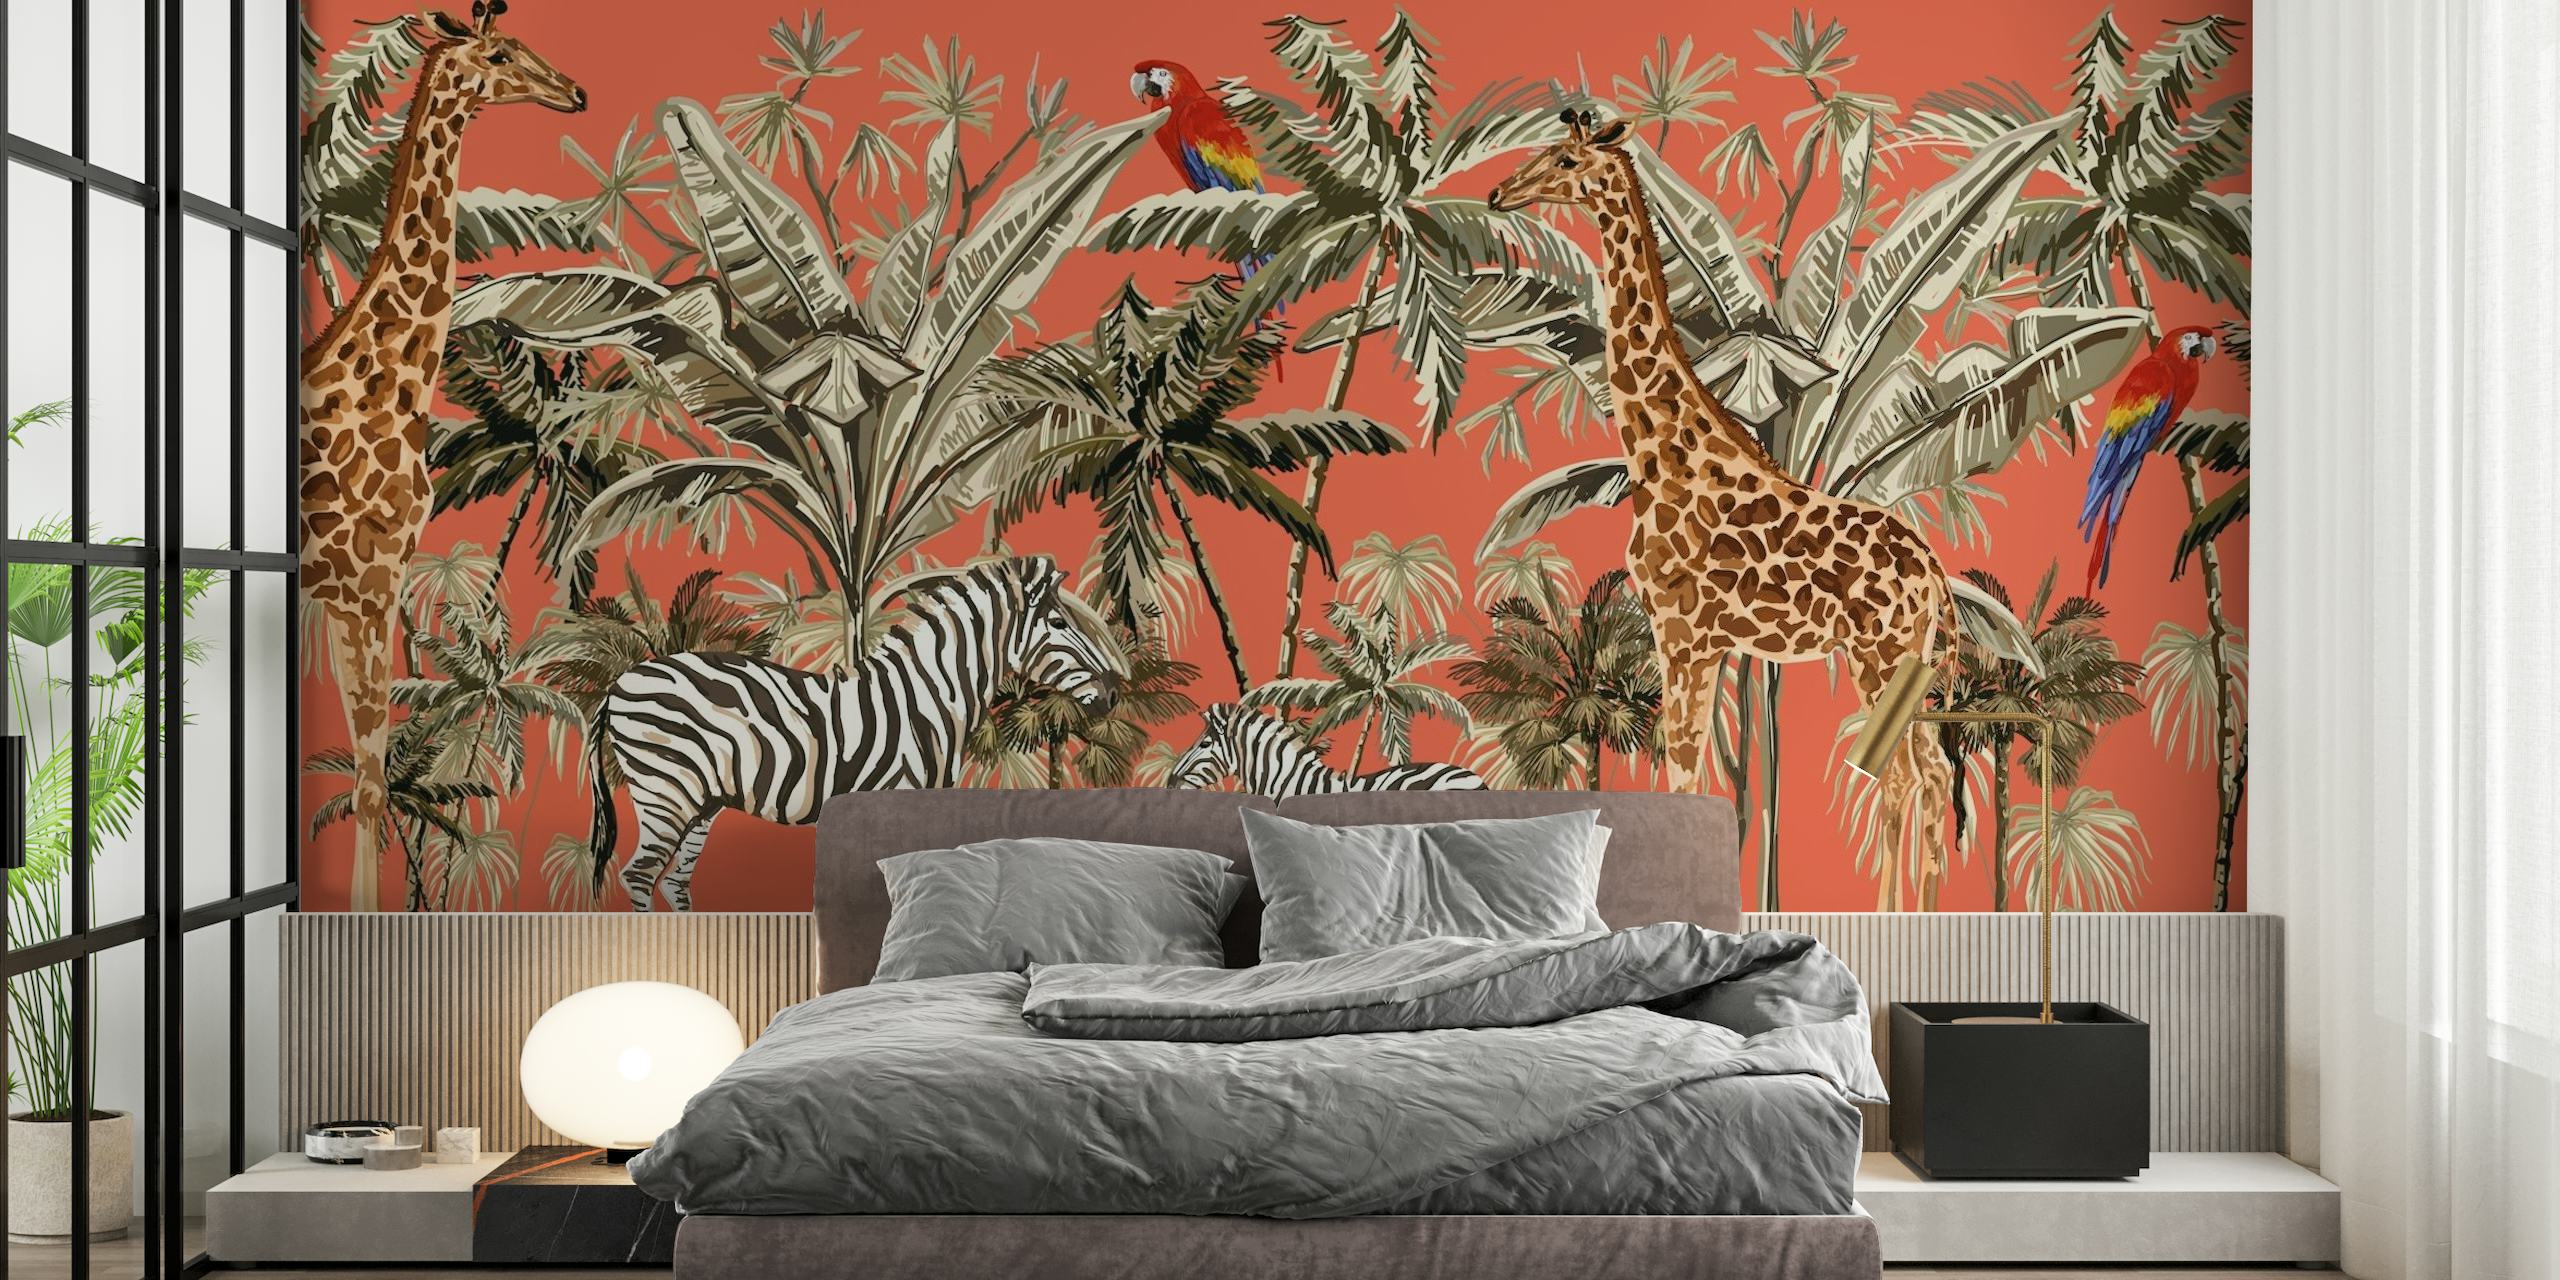 Safari-inspired wall mural with zebras, giraffes, and birds on an orange background